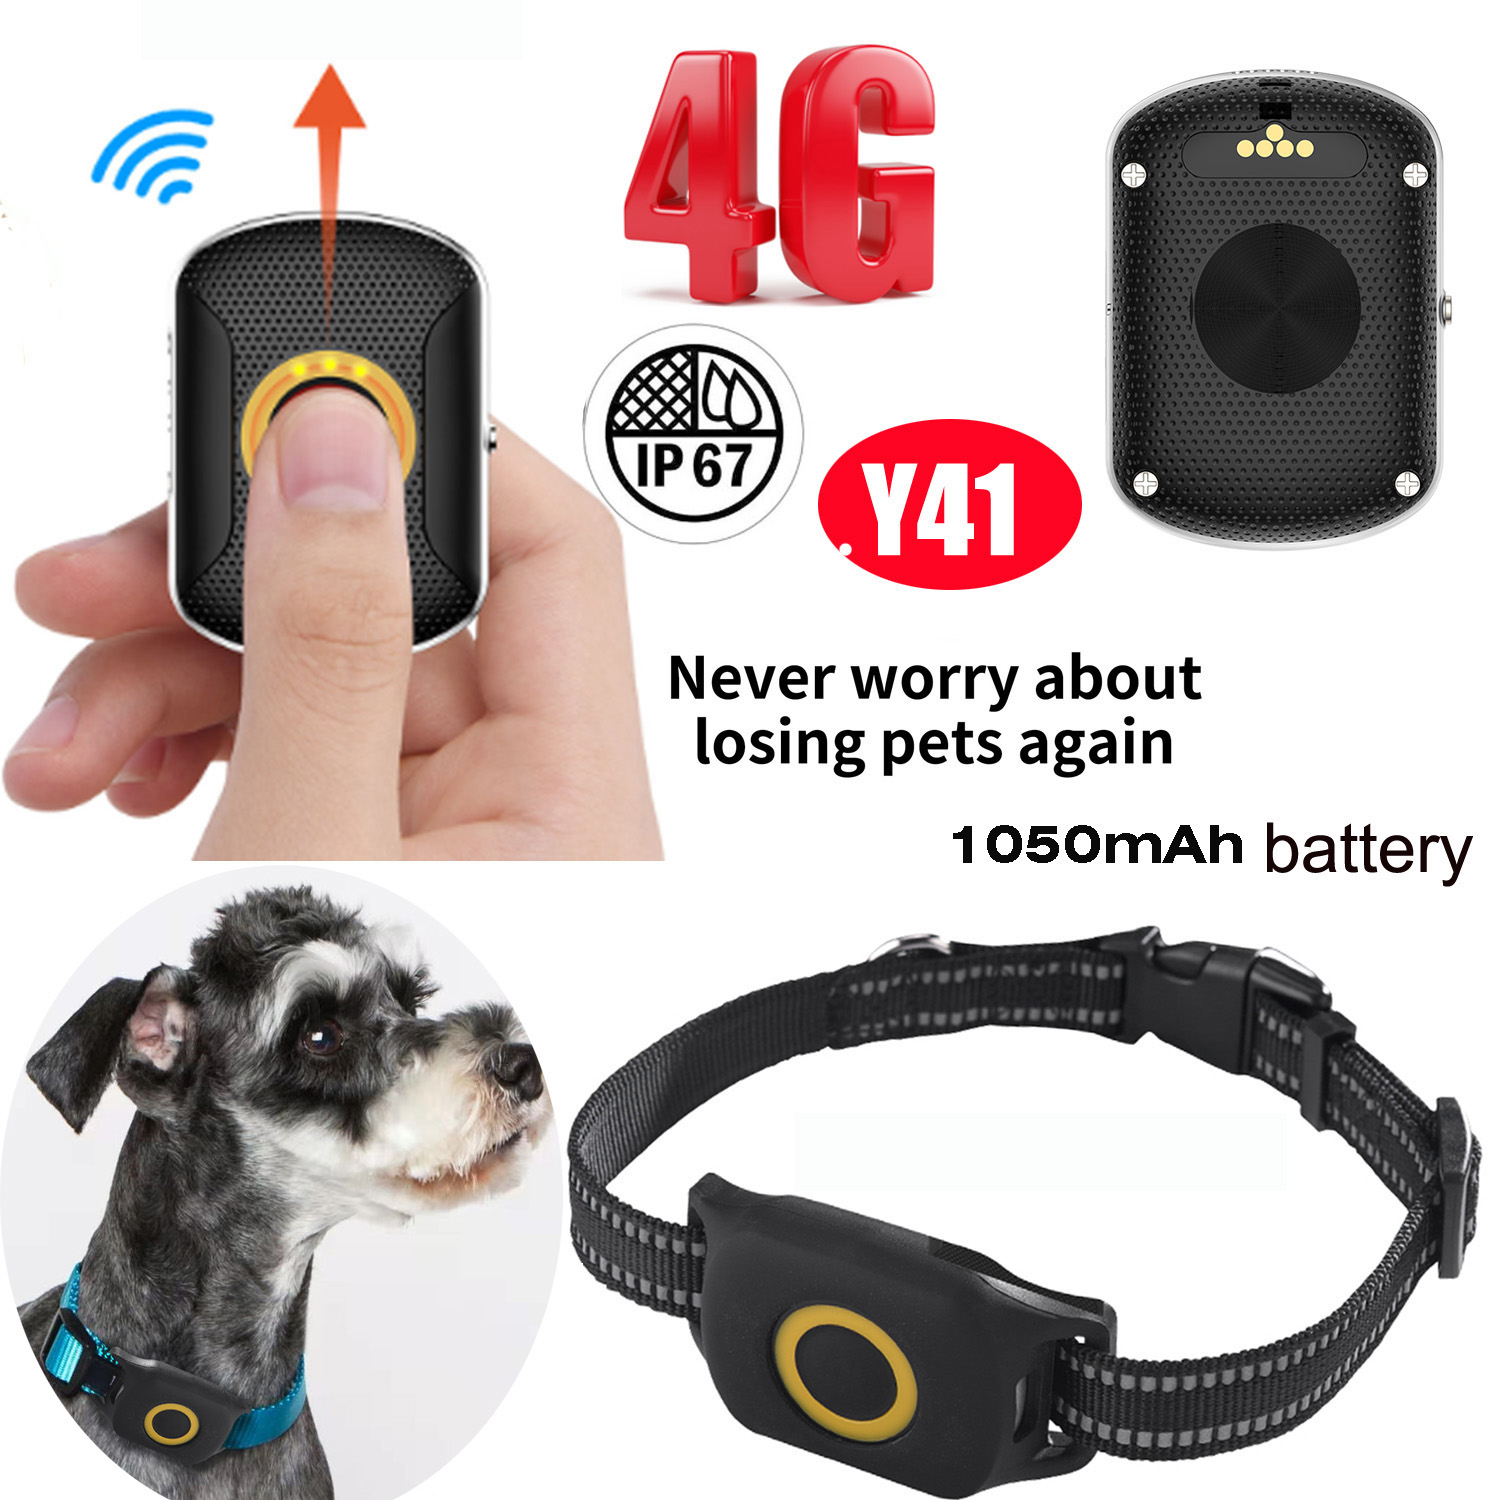 Quality 4G IP67 Waterproof Safety Mini Pets GPS Tracker with Geo-fence Setup for Global Tracking Location Y41